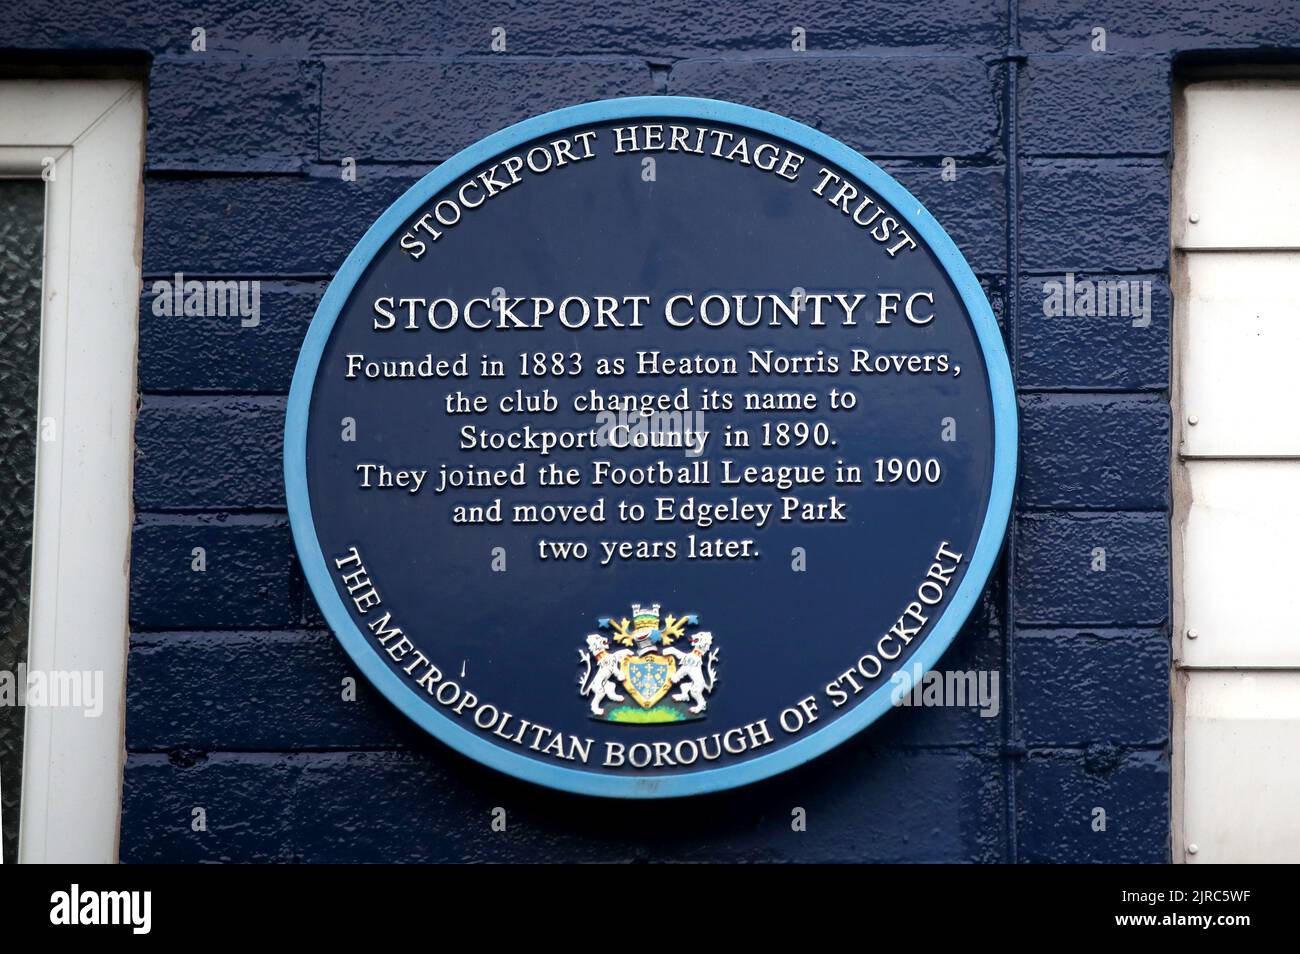 A general view of a Stockport County plaque ahead of the Carabao Cup second round match at Edgeley Park, Stockport. Picture date: Tuesday 23rd August, 2022. Stock Photo